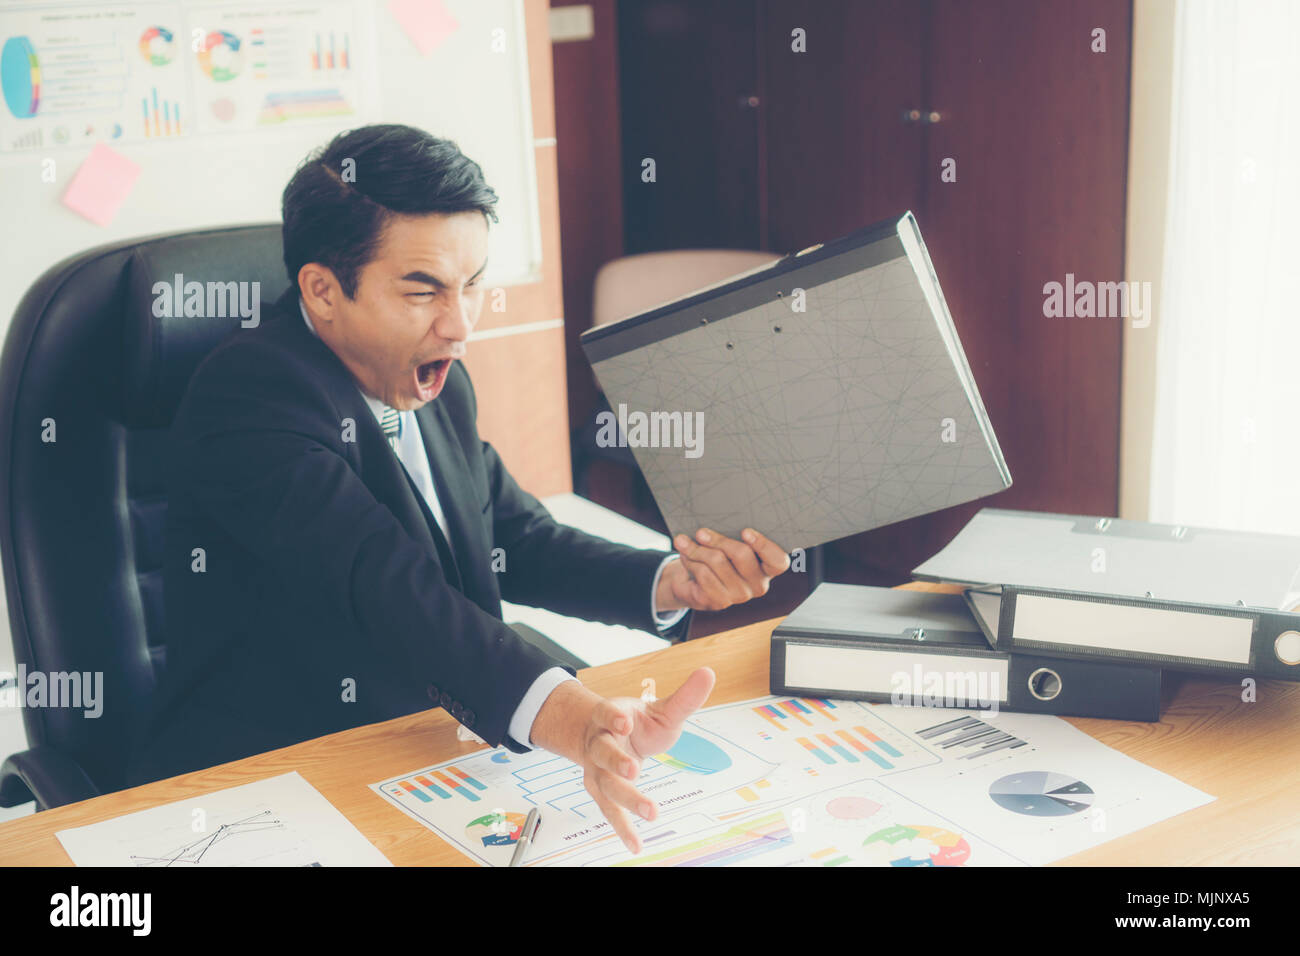 stressed business man in the office Stock Photo